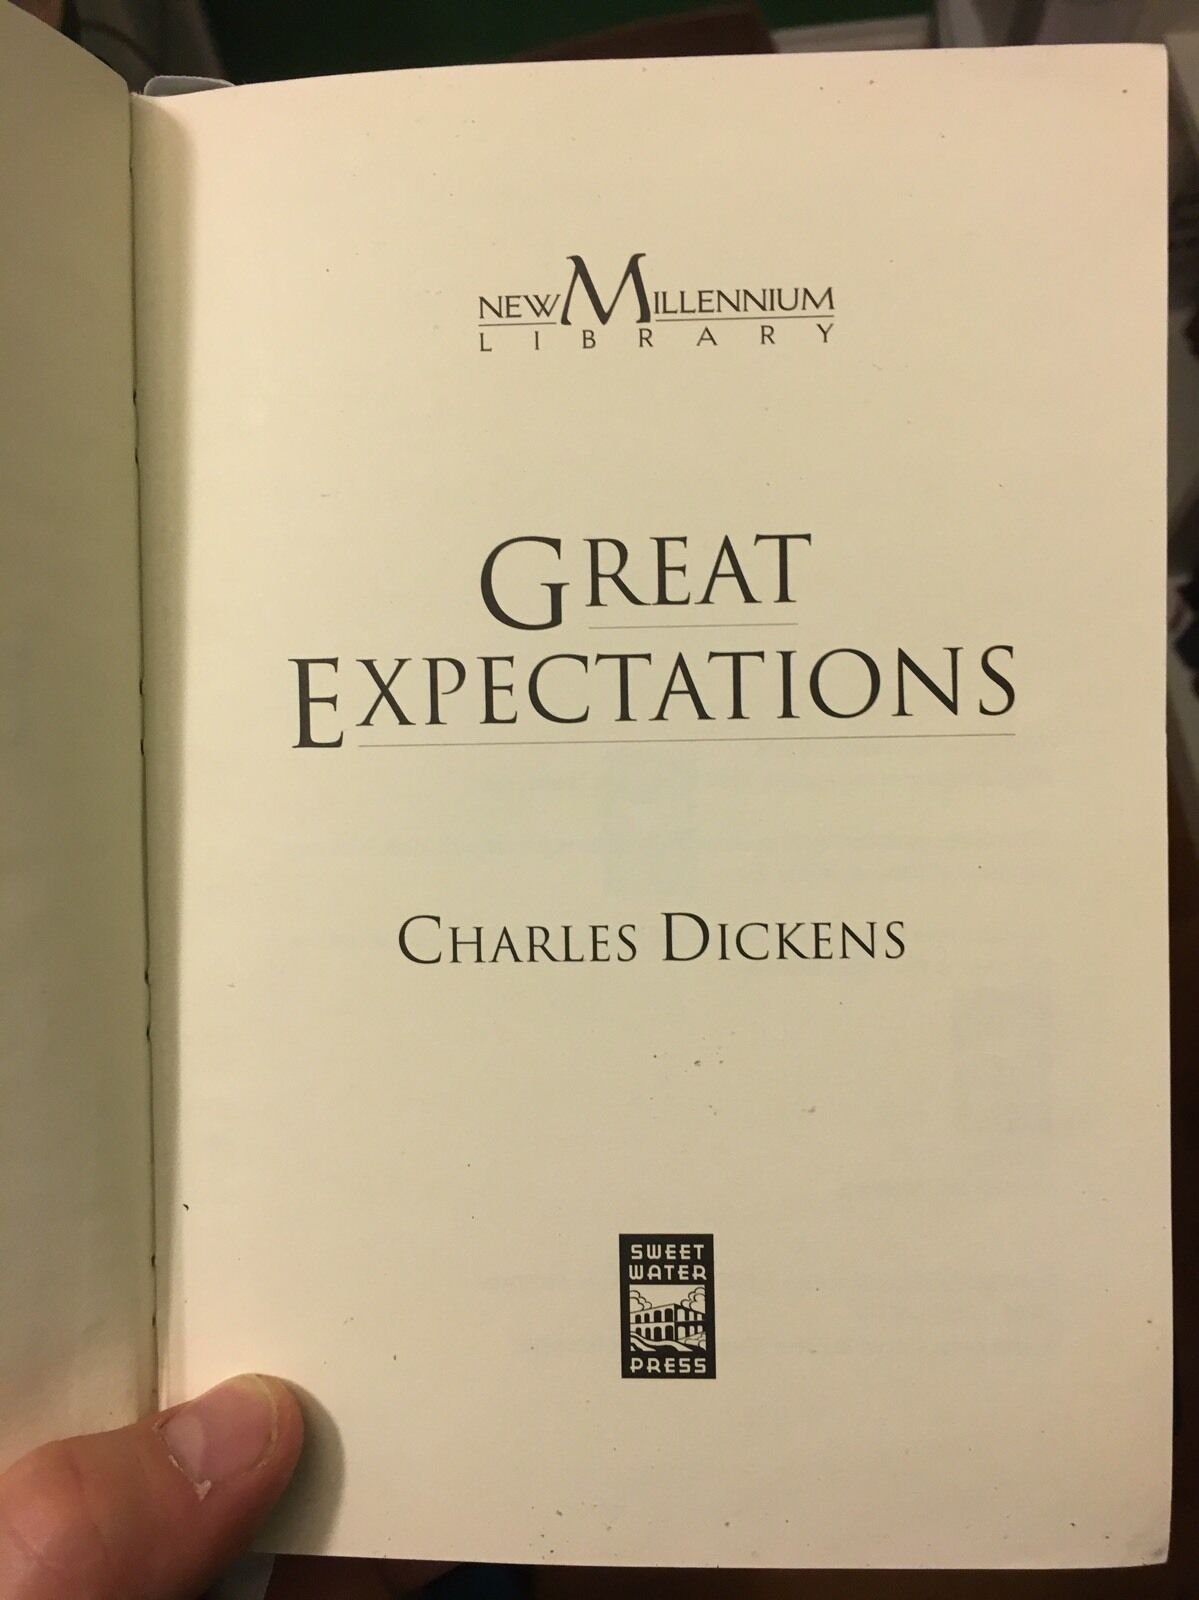 DICKENS, Charles "Great Expectations" [Sweetwater Press, 1998] - Buzz Bookstore